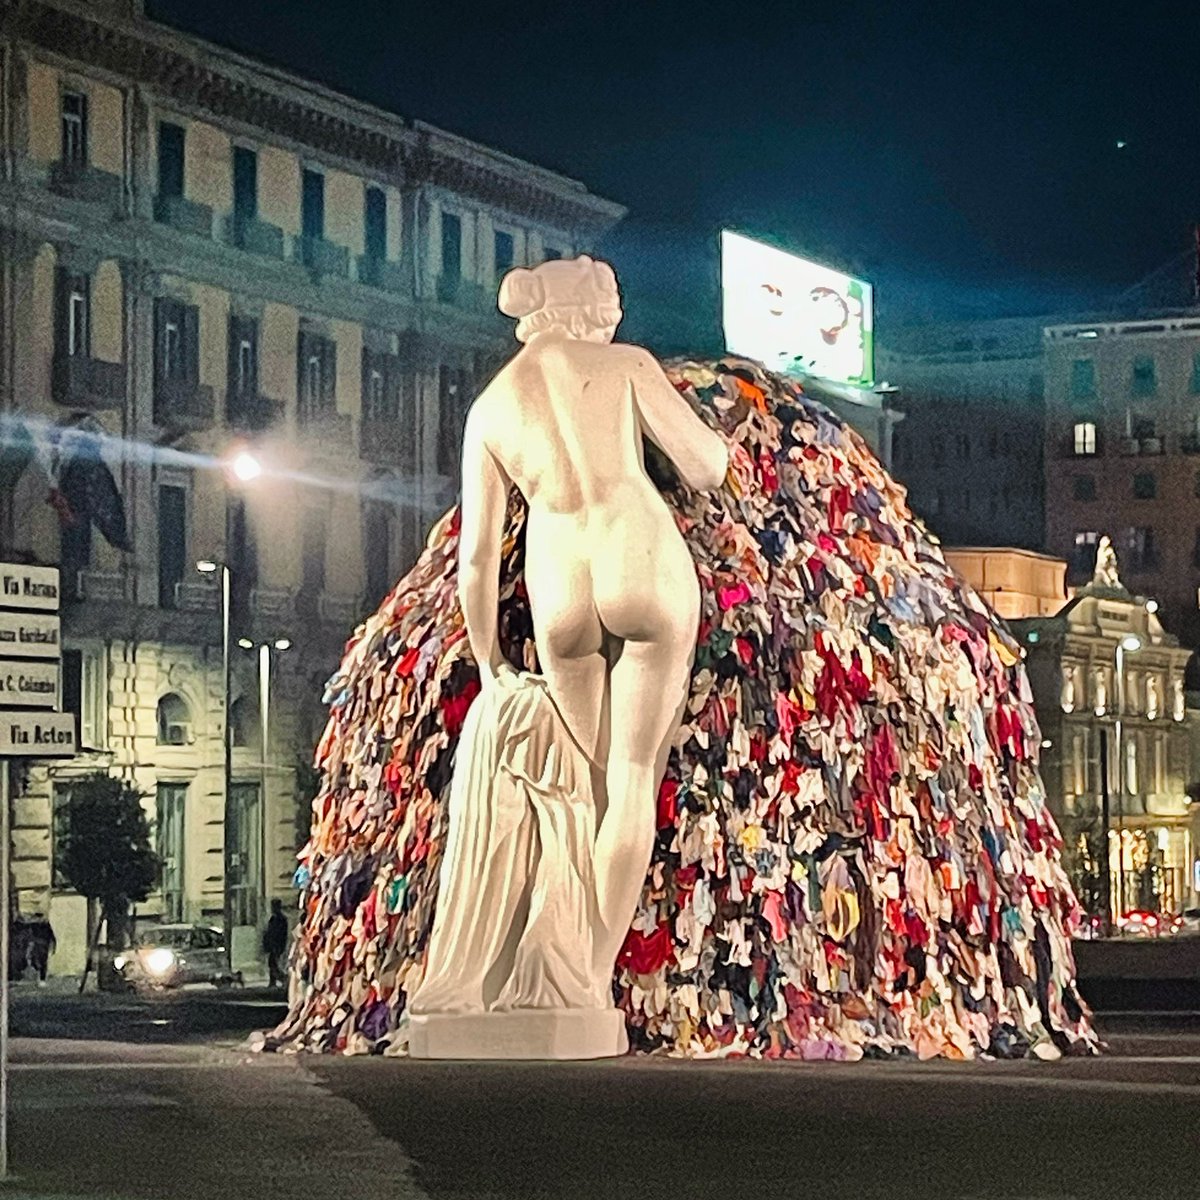 to break the rules you must first know them 🏴‍☠️
#bigcitylife #art #michelangelopistoletto #thevenusofrags #naples #napoli